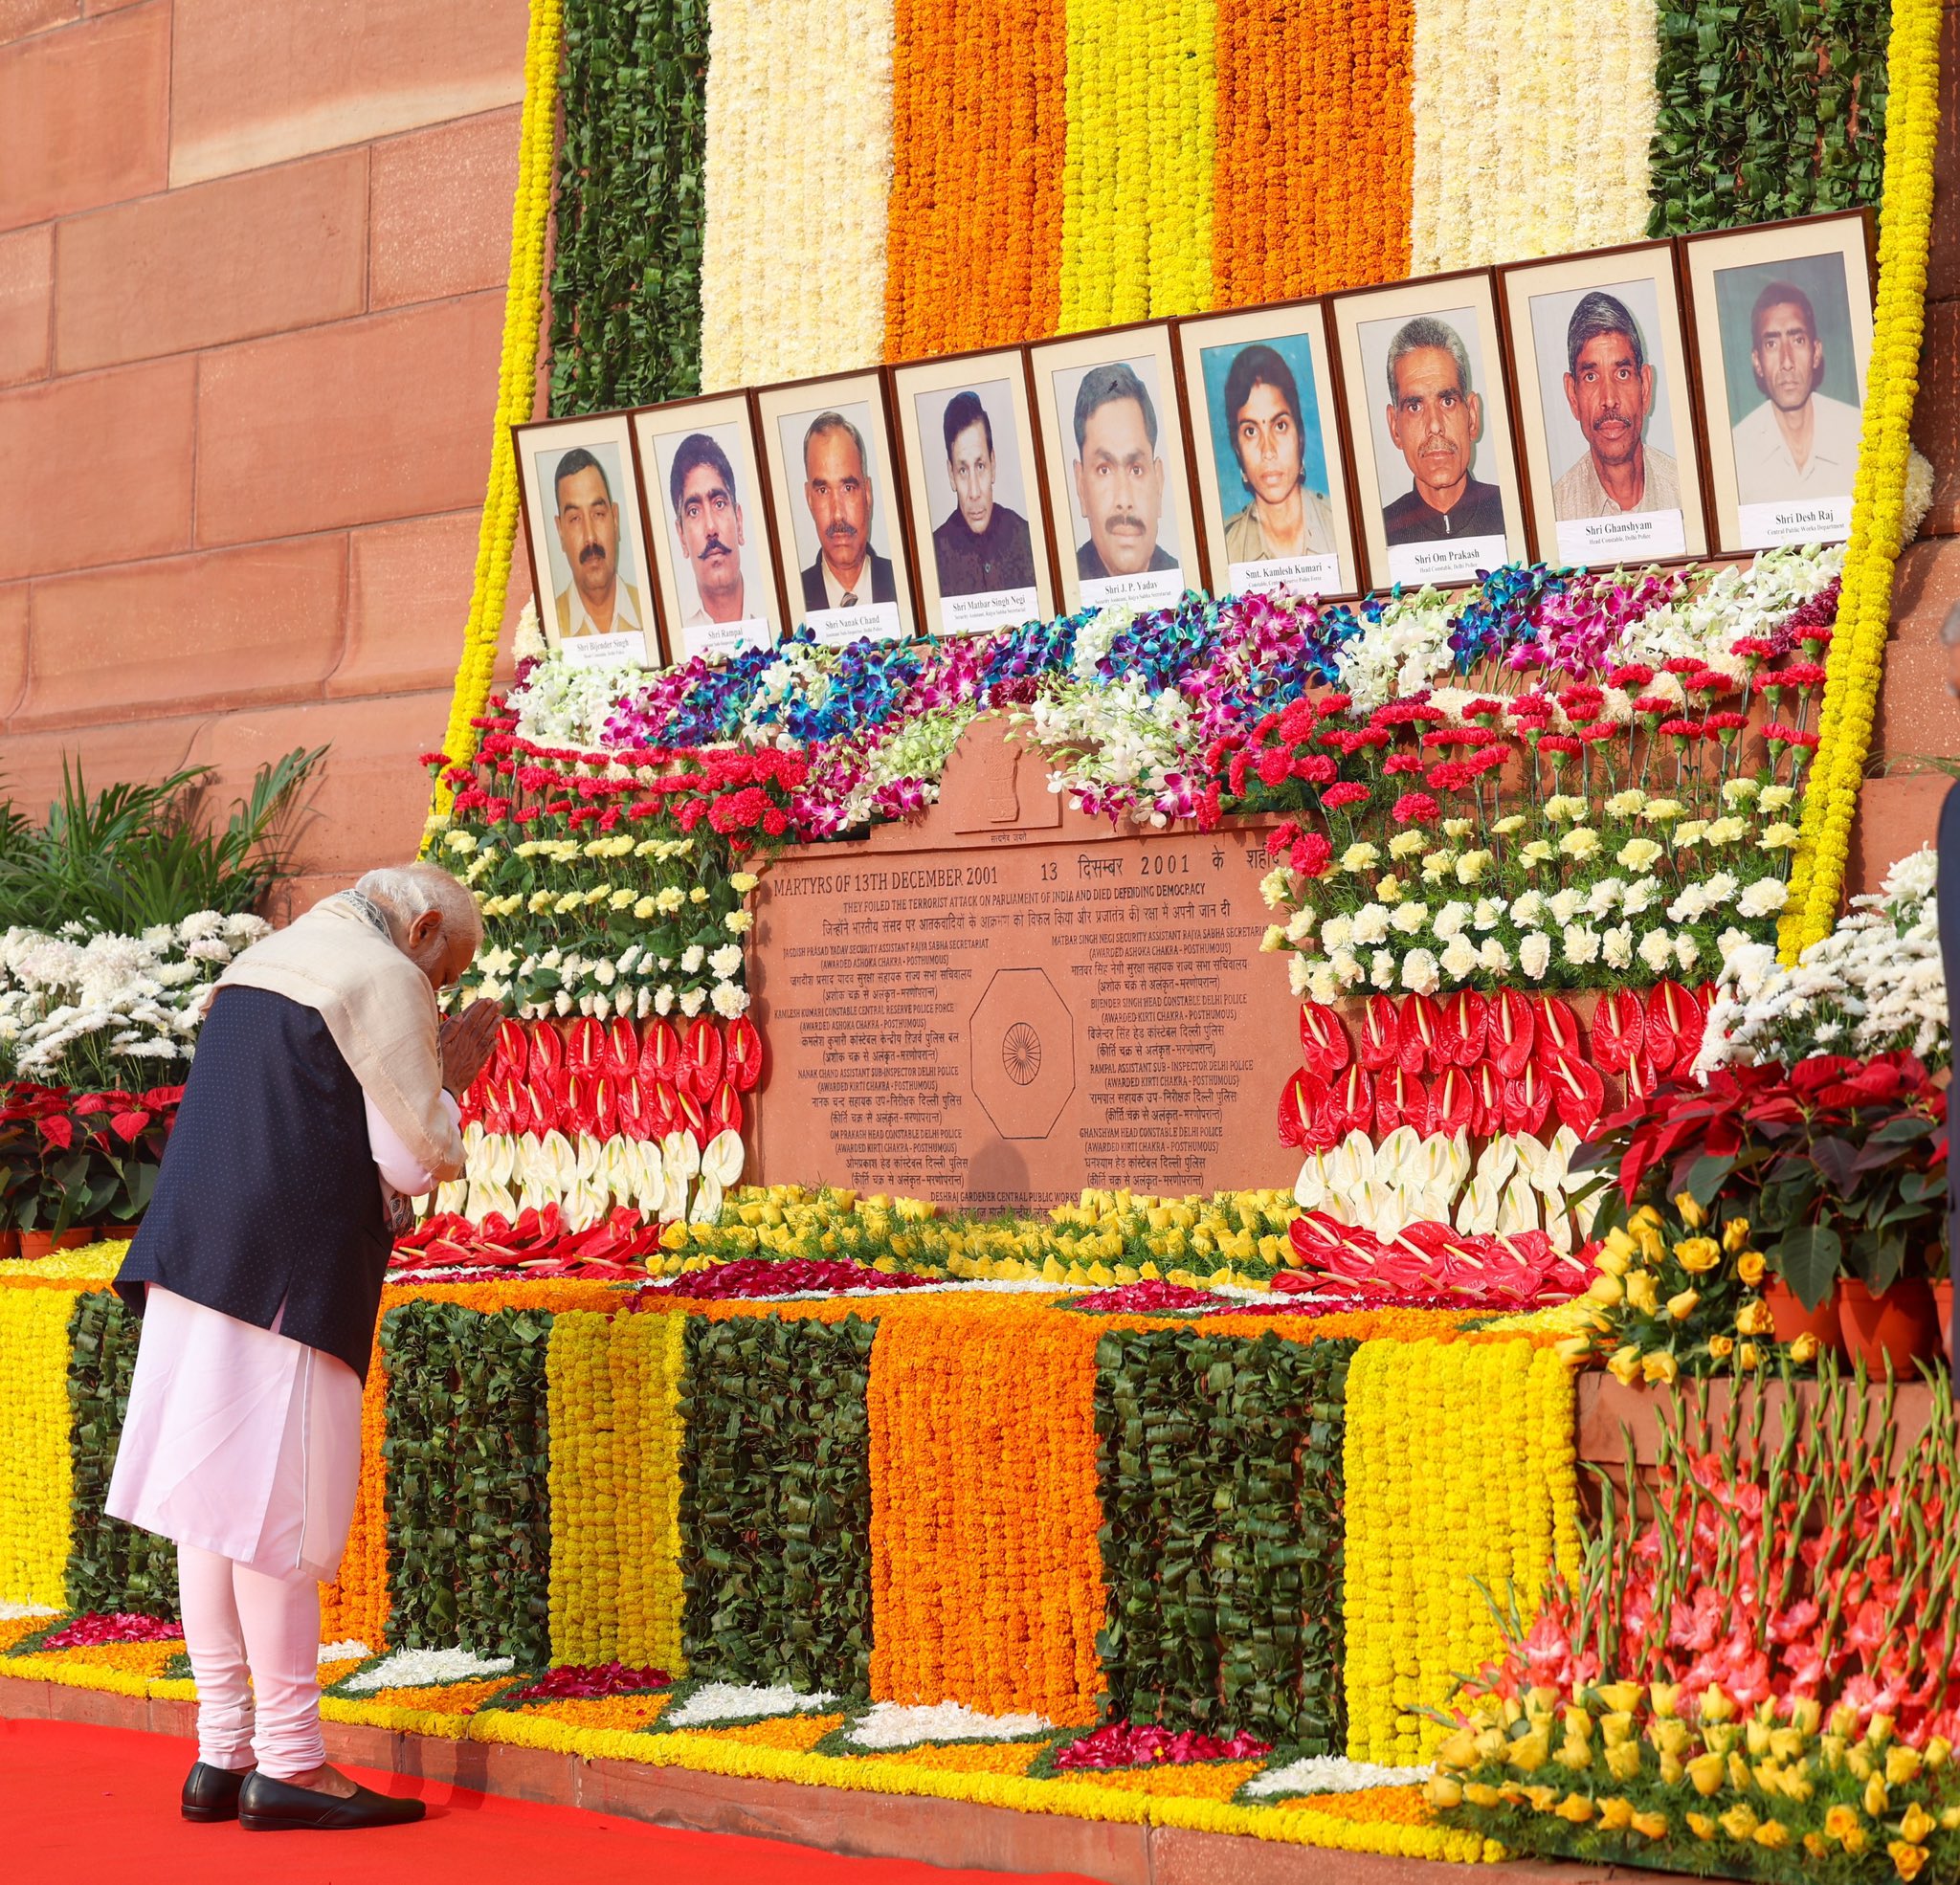 PM pays heartfelt tributes to brave security personnel martyred in the Parliament attack in 2001.